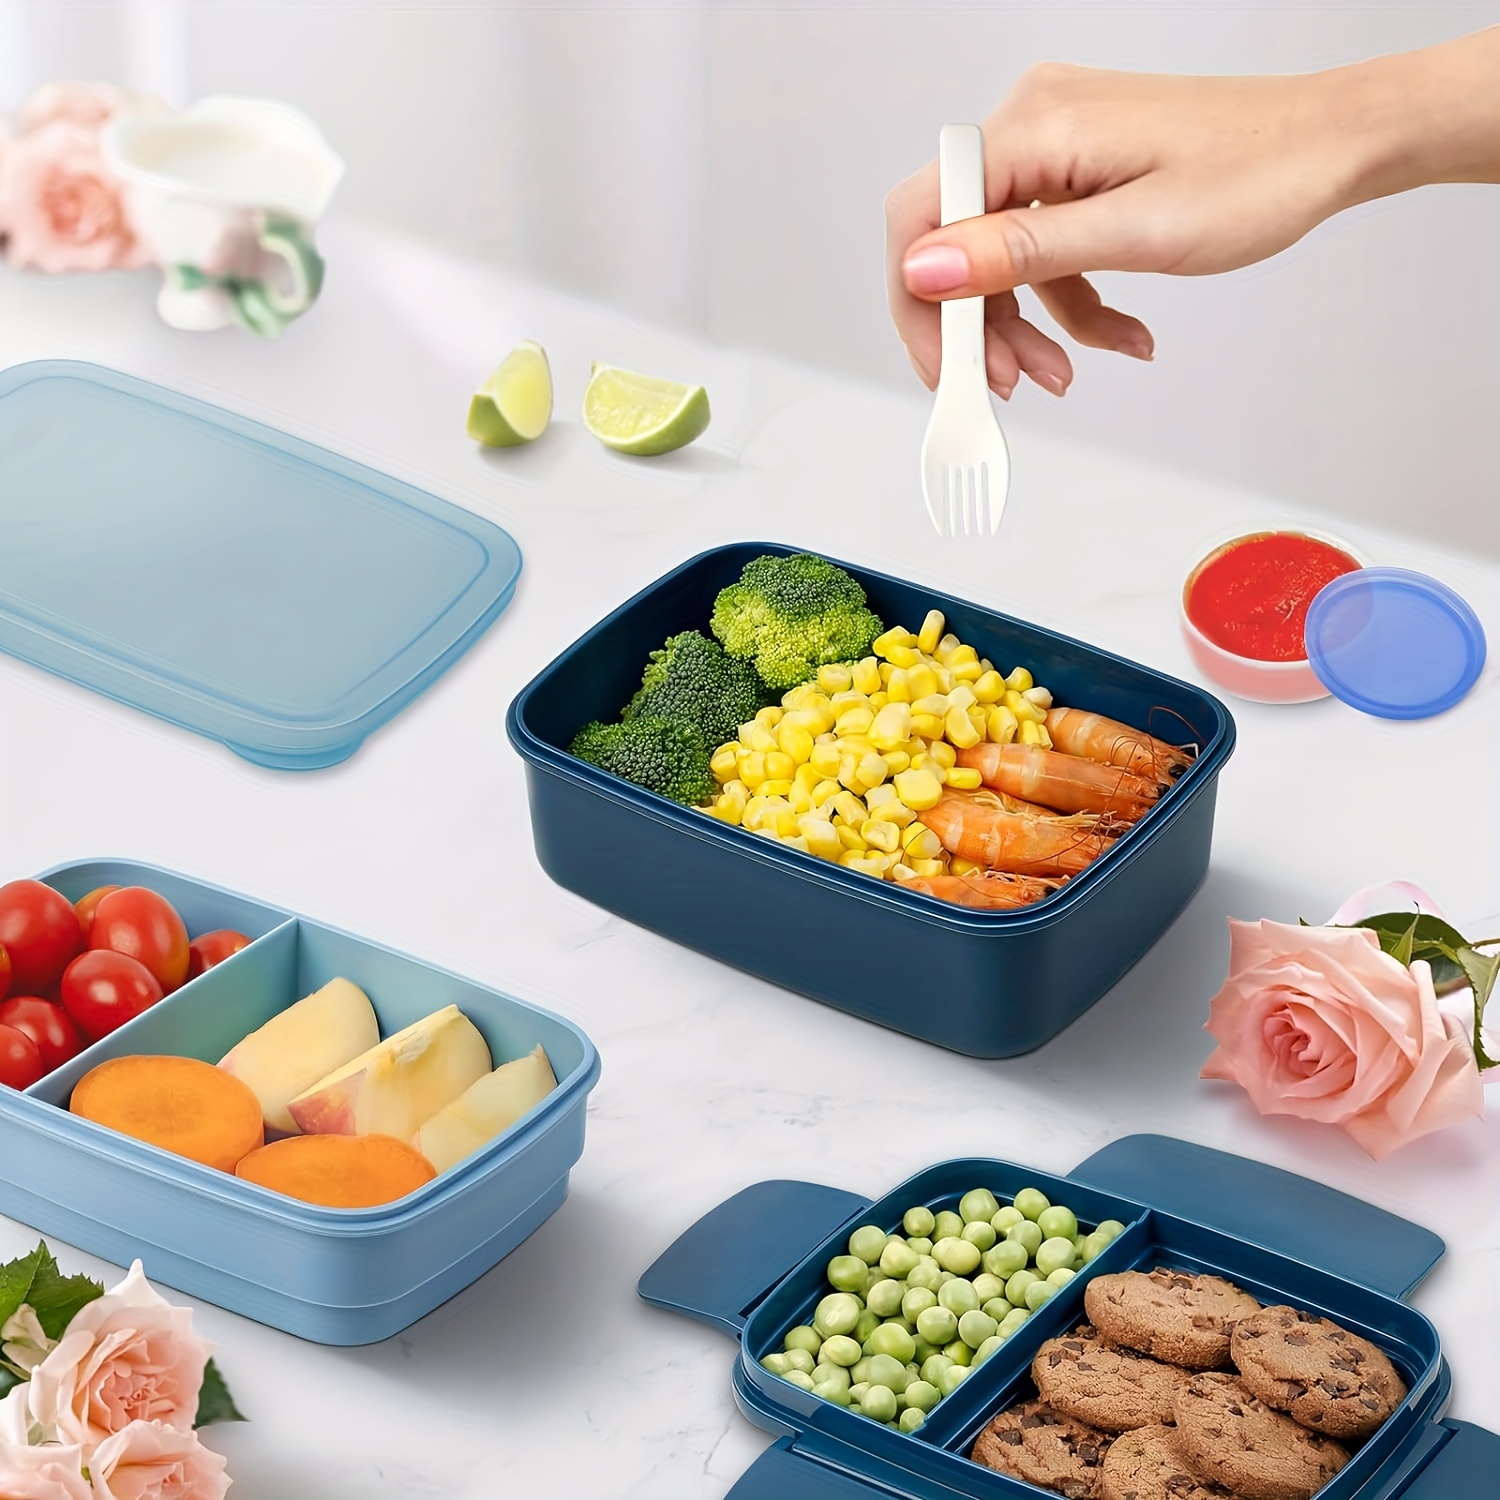 1pc Lunch Boxes 5-Compartment Lunchbox for Leak Proof Lunch Box